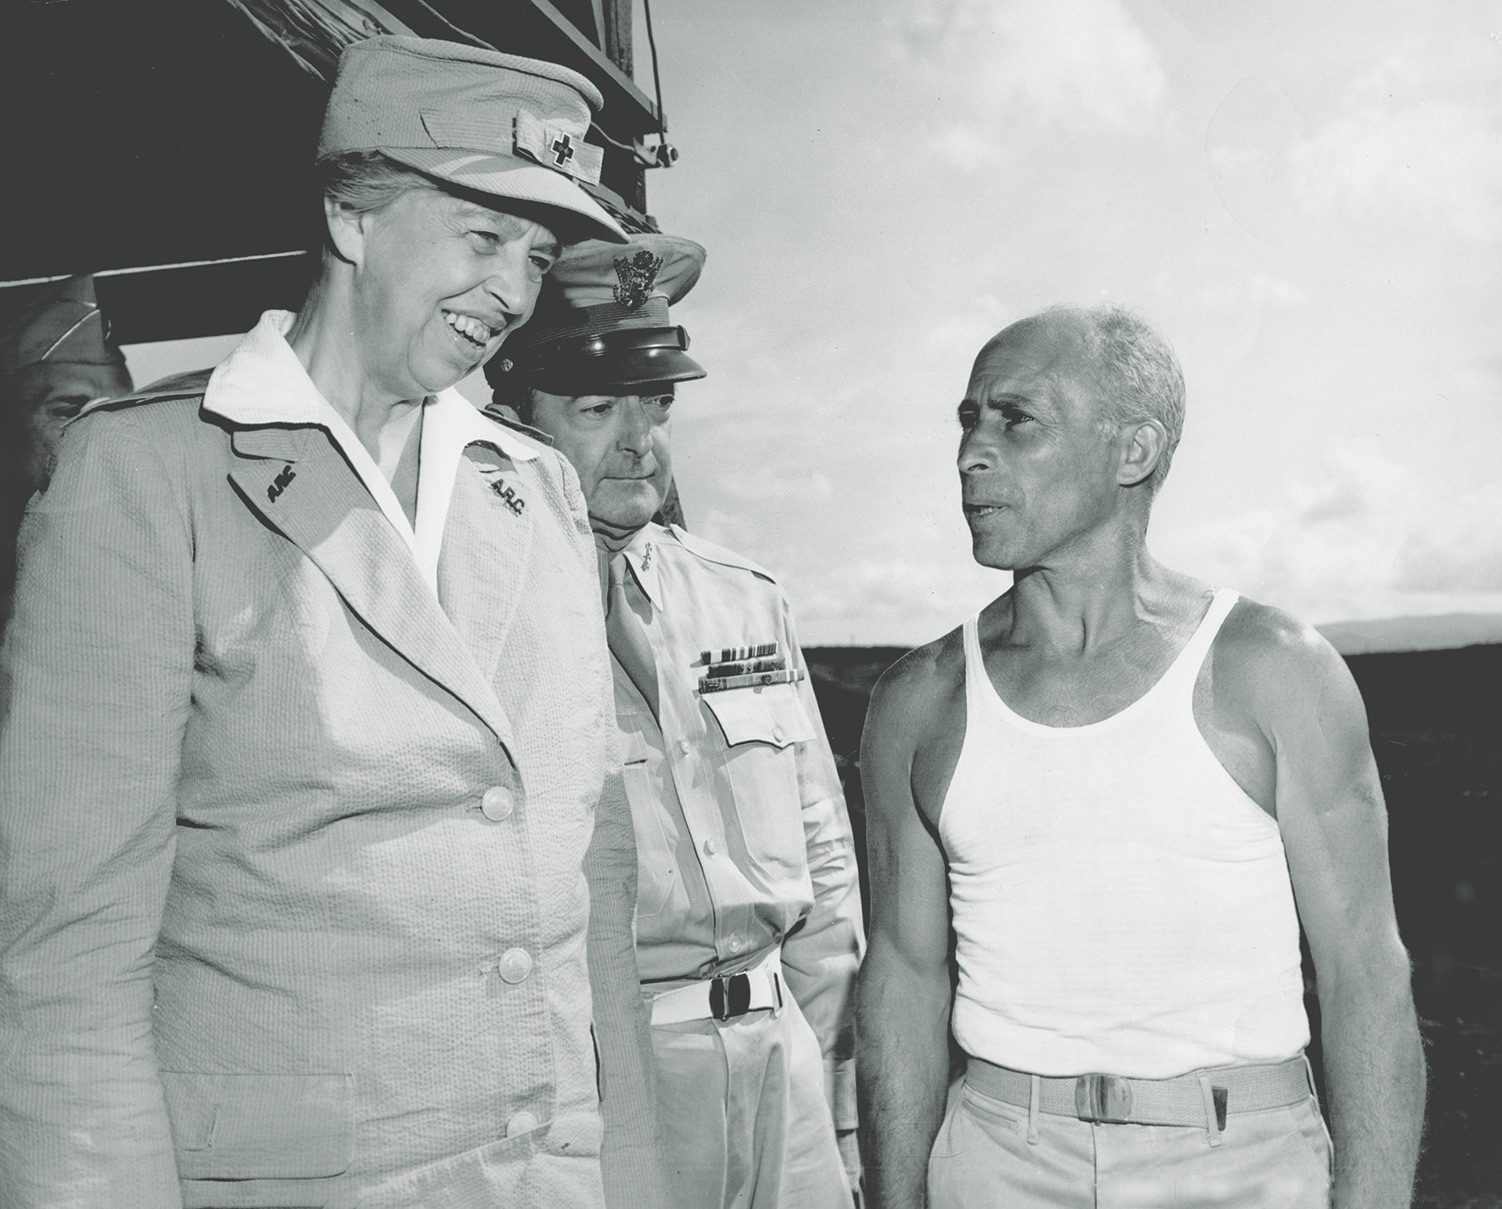 First Lady Eleanor Roosevelt and General Robert C. Richardson Jr. visit d’Eliscu at his school in Hawaii in 1943. (U.S. Army Signal Corps/University of Hawaii Archives)